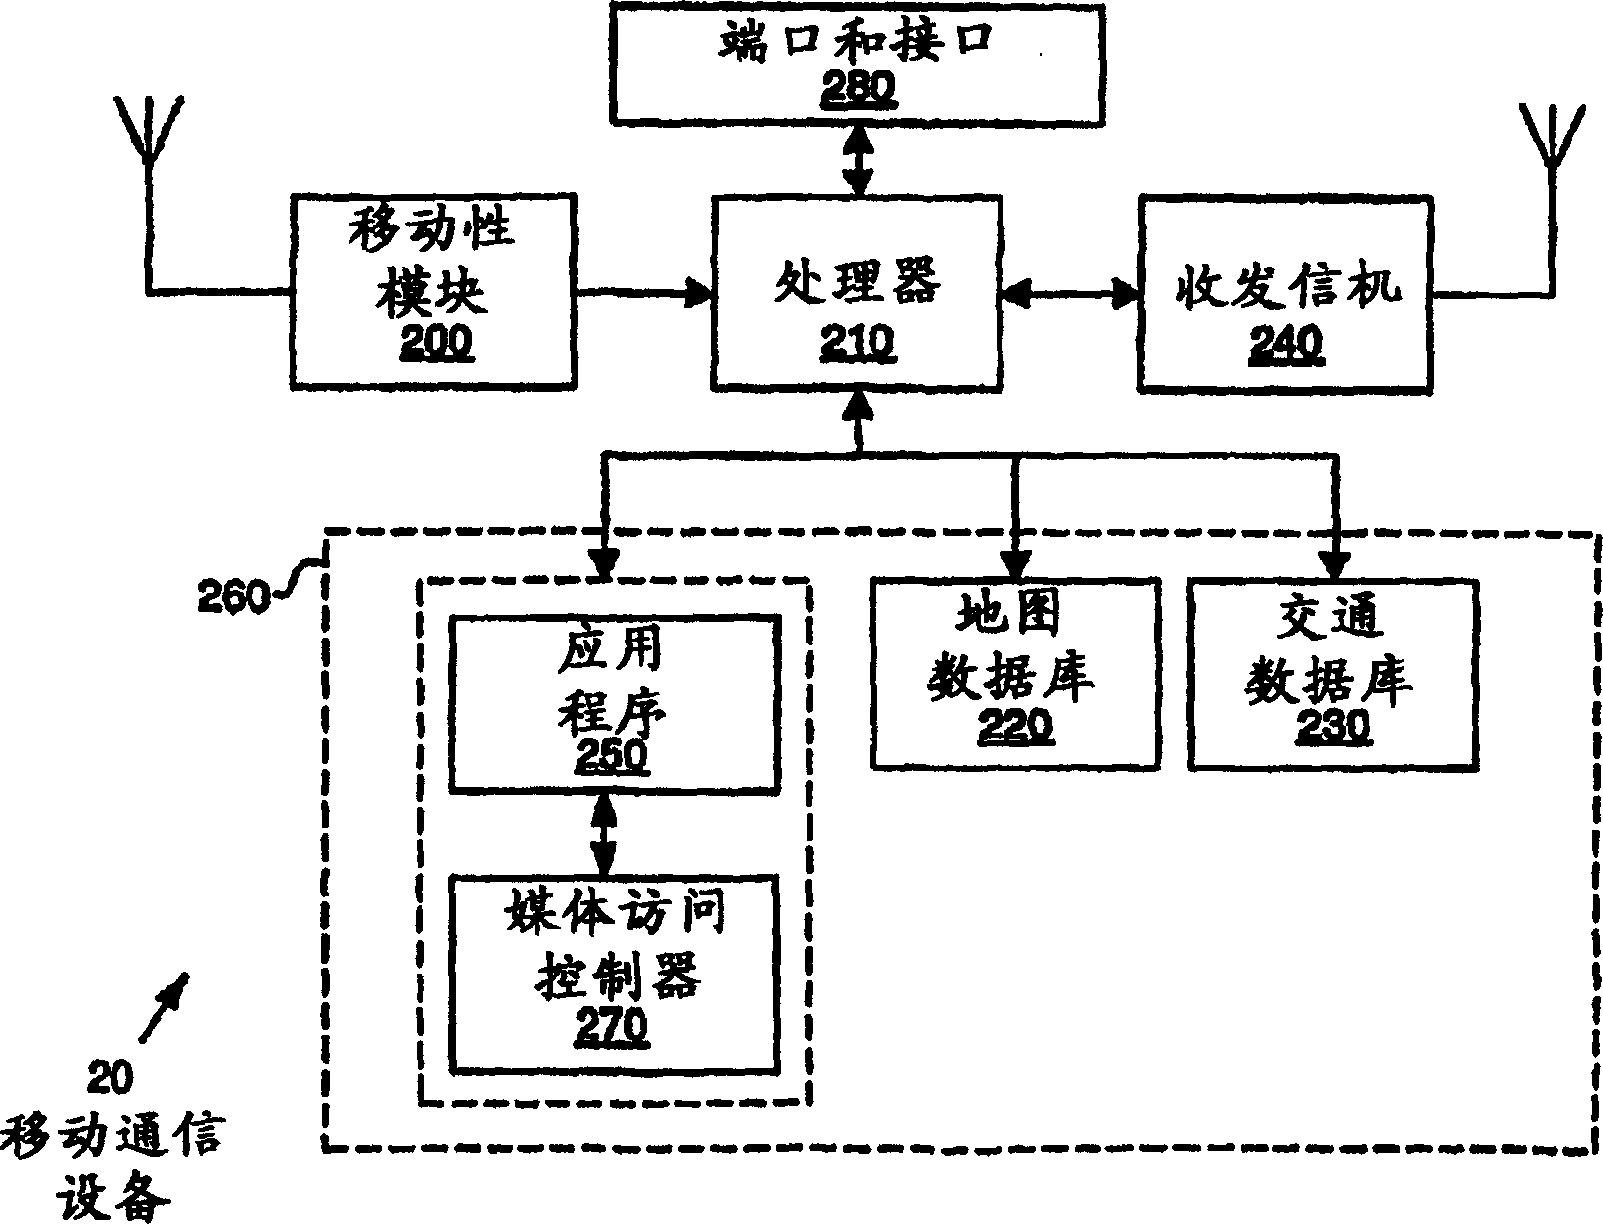 Enhanced mobile communication device and transportation application